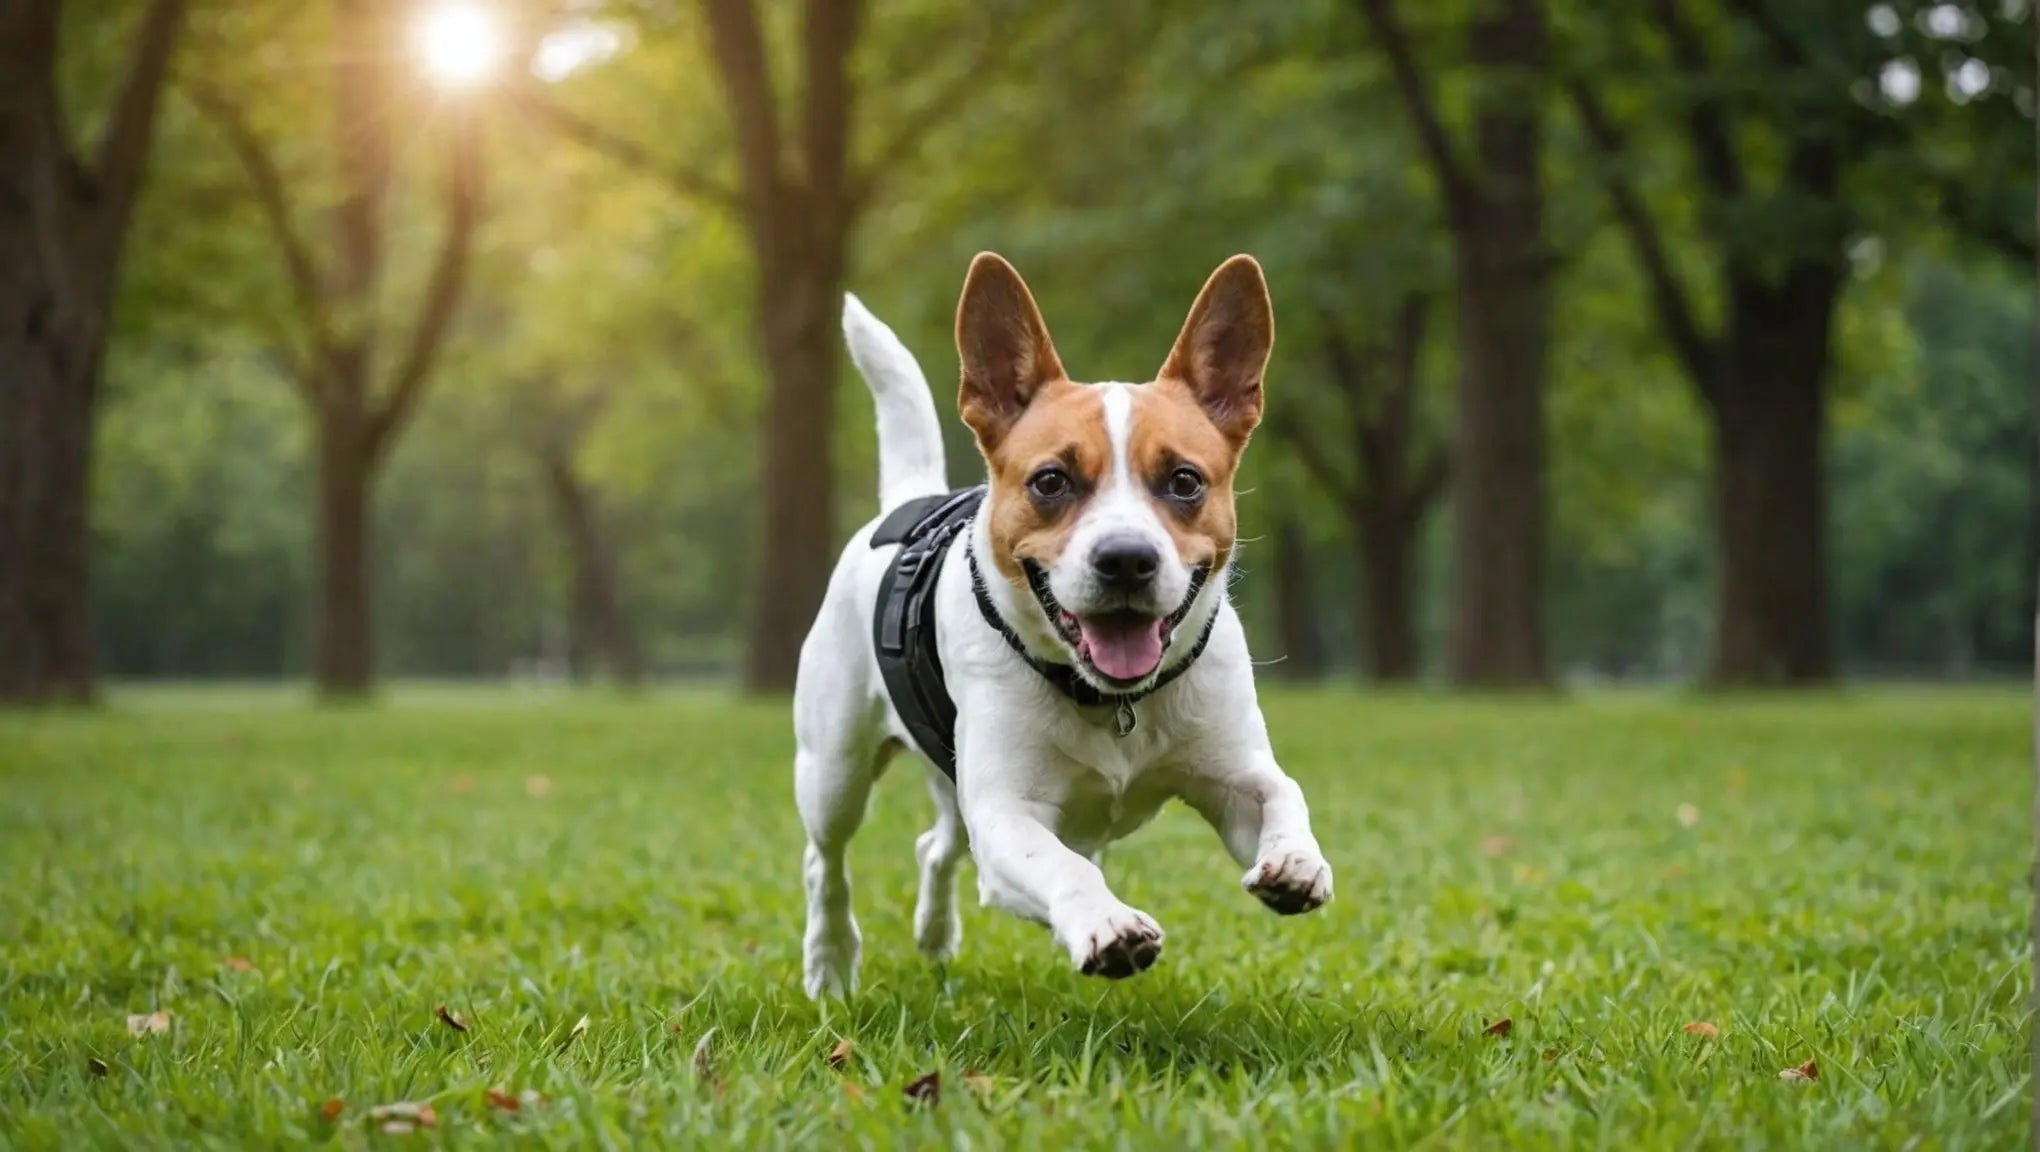 5 Ways to Provide Physical Exercise for Dogs